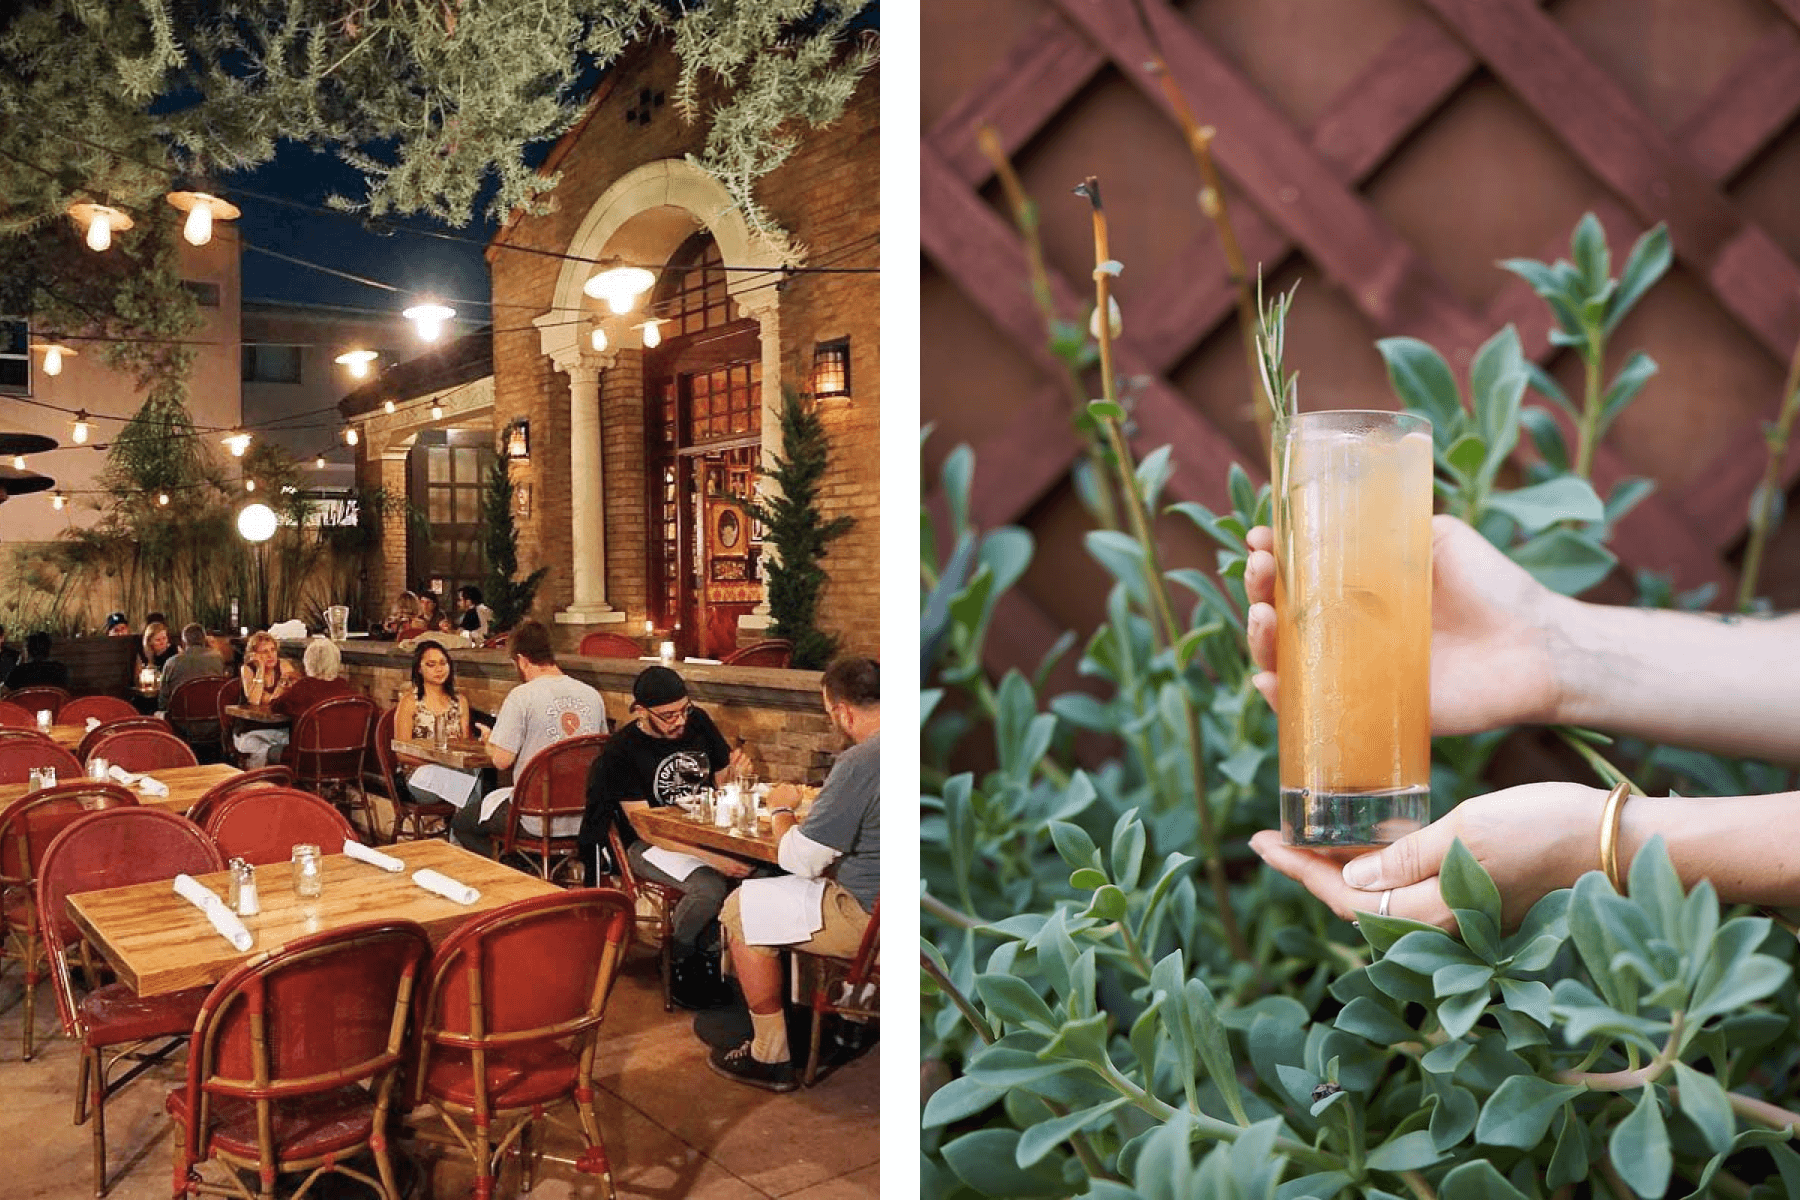 Left: People enjoying their meals at The Edendale’s backyard; Right: A close up of hands holding a cocktail.